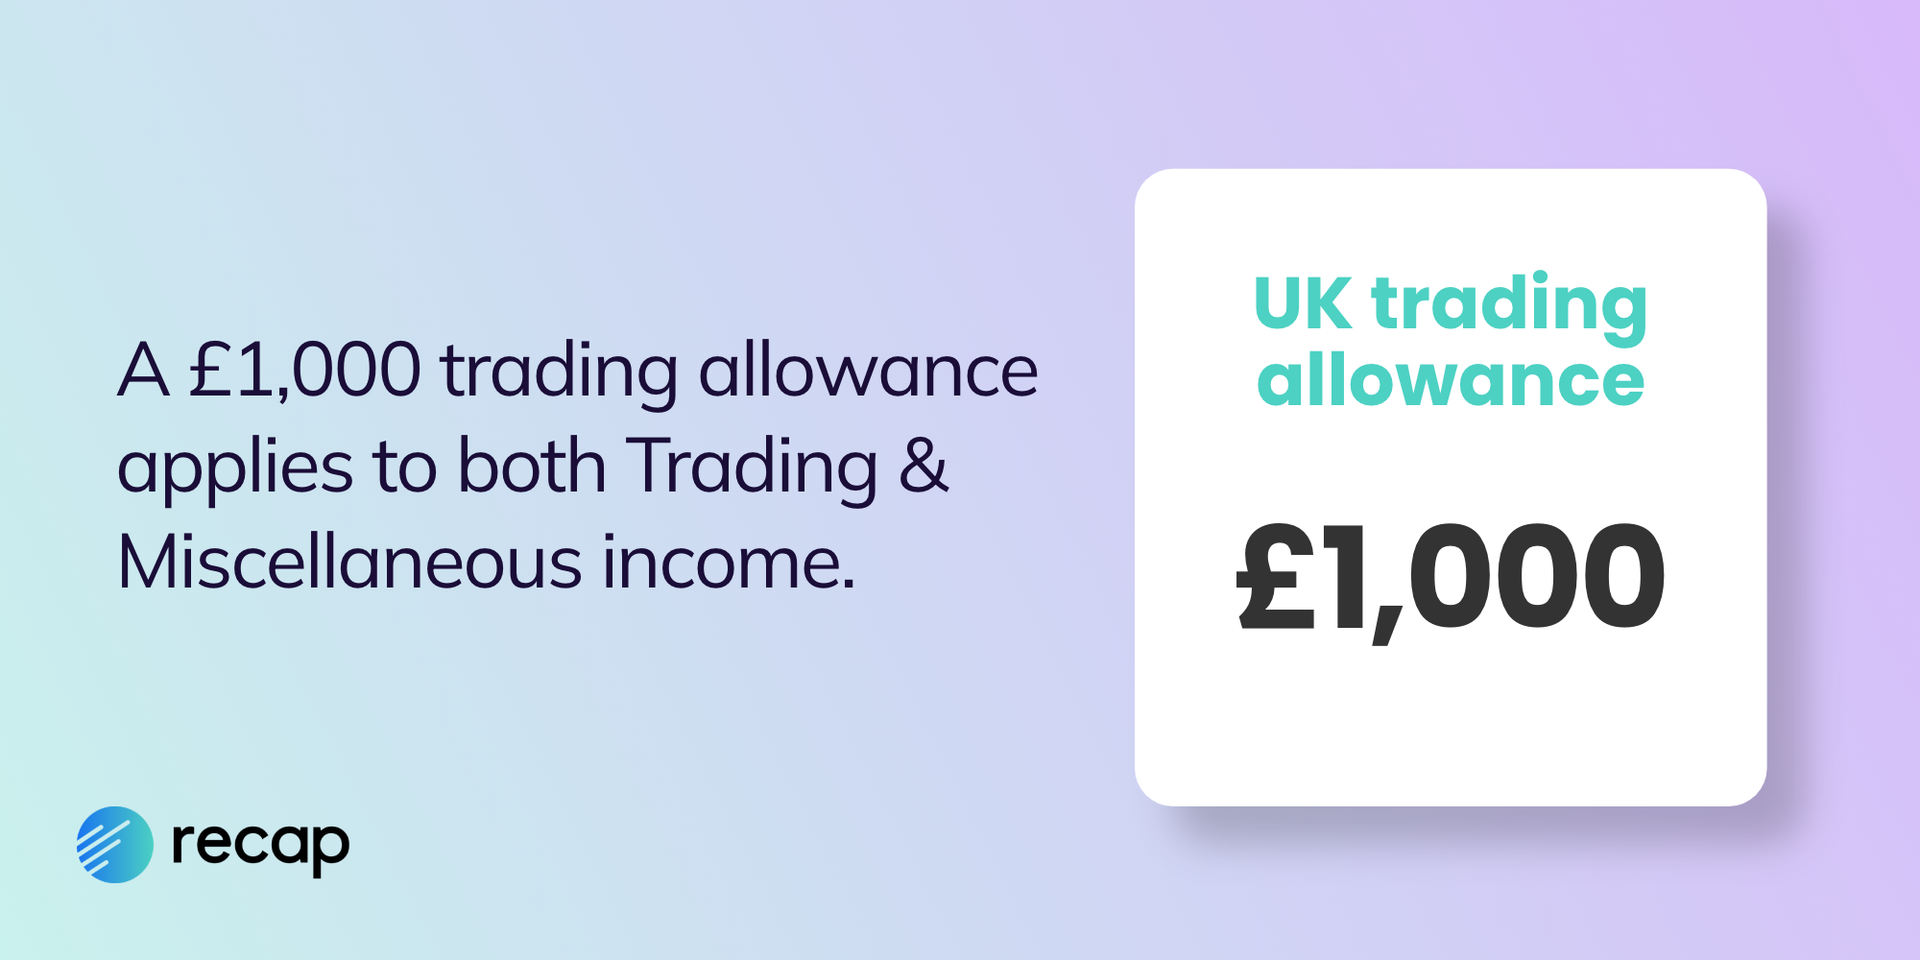 An infograph showing that there is a UK trading allowance of £1,000 that applies to Trading and Miscellaneous income